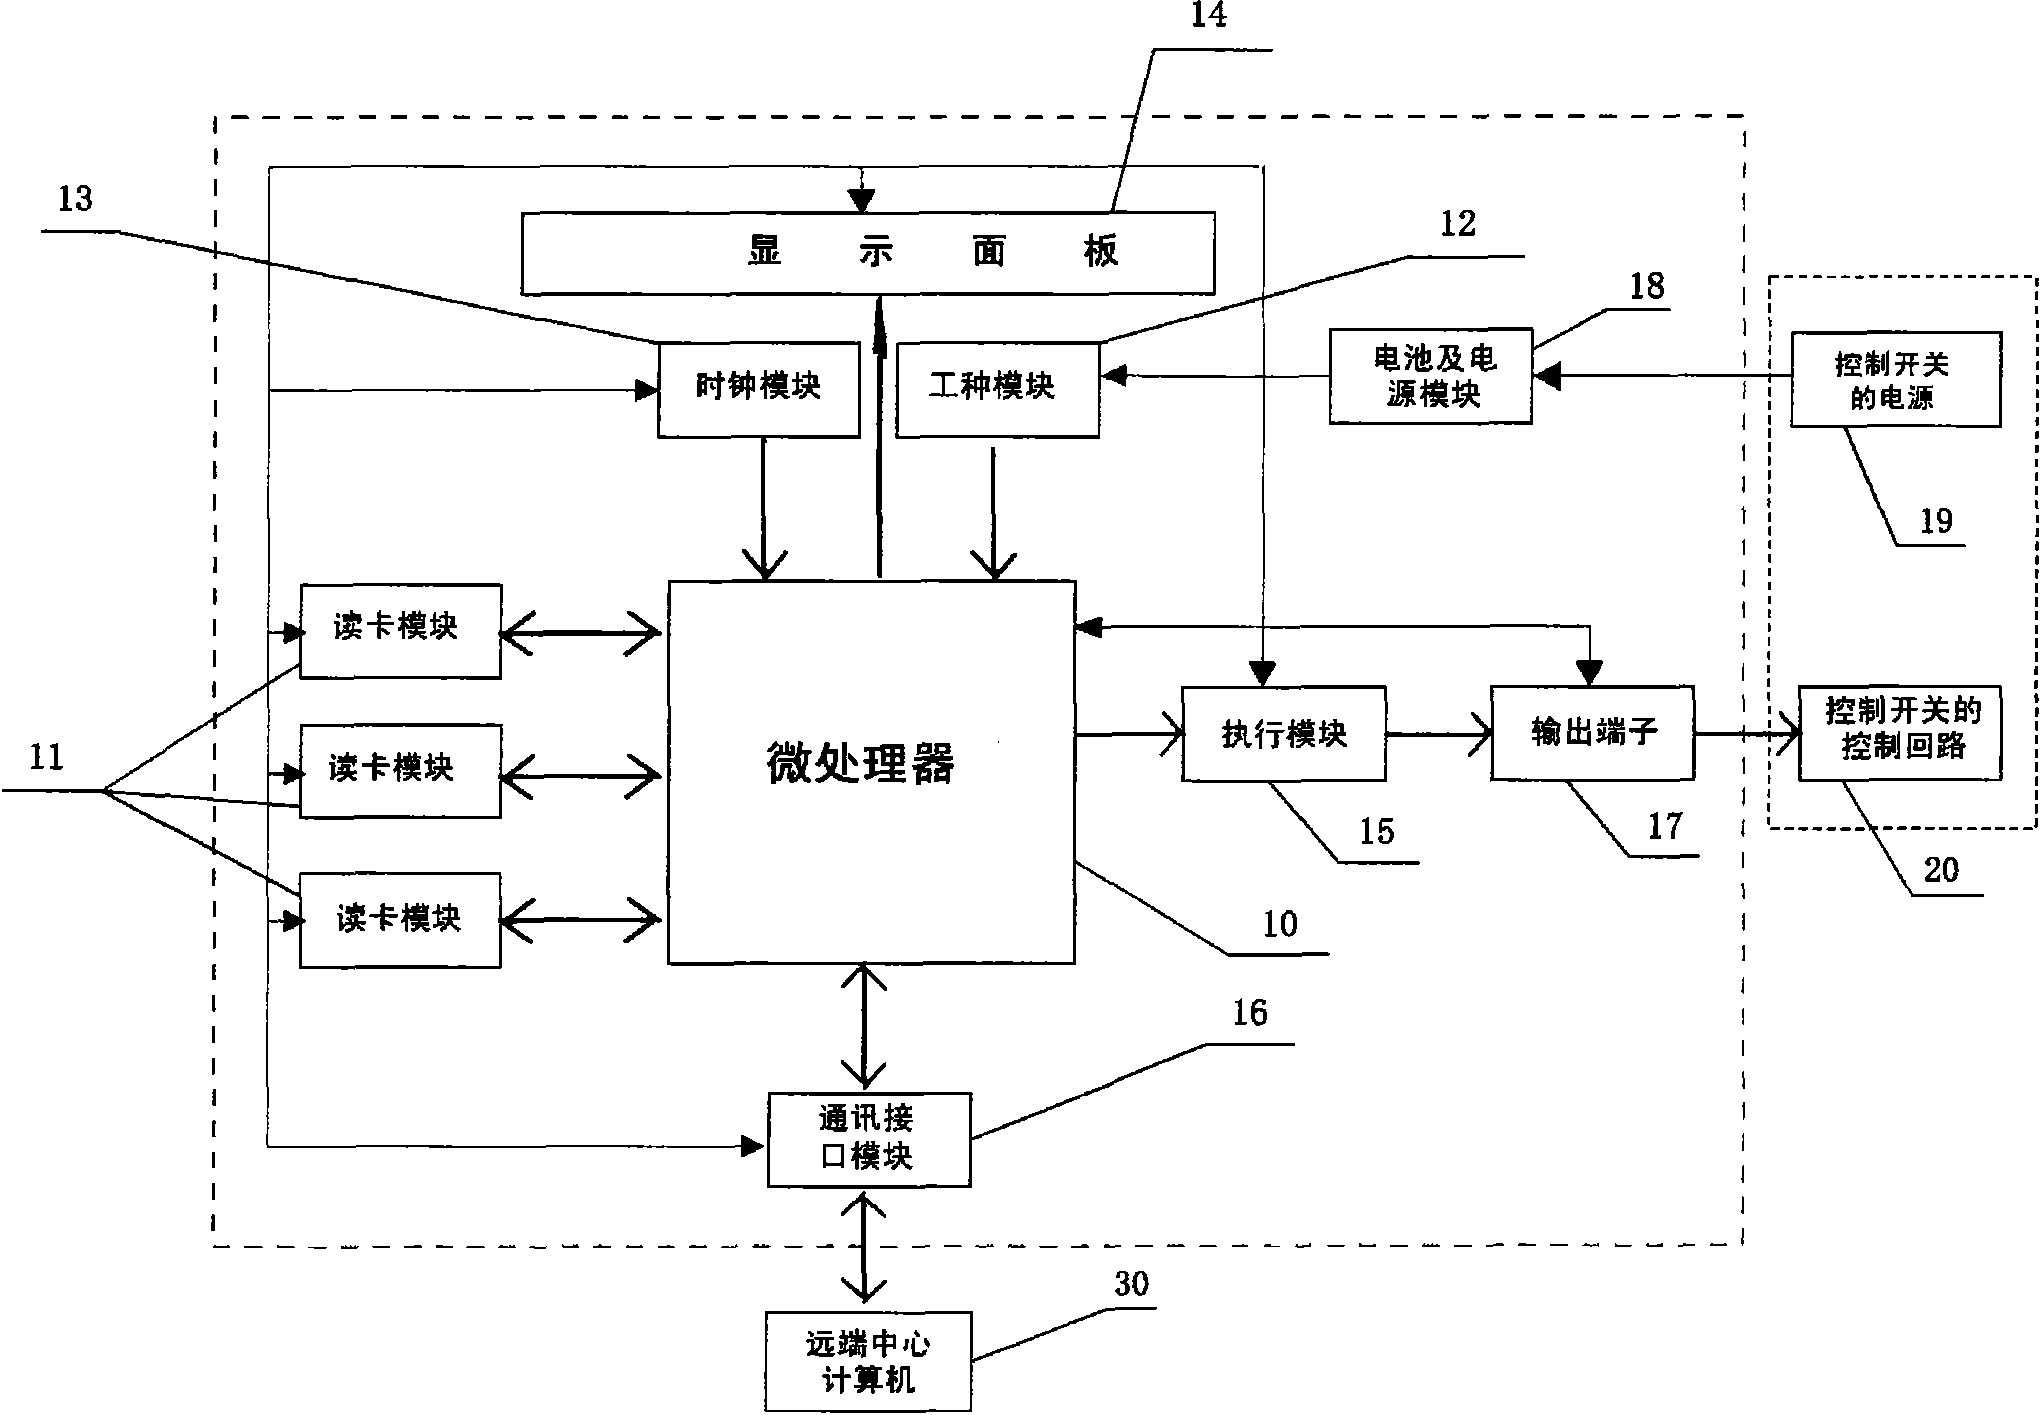 Card-reading circuit controller for special equipment operating personnel